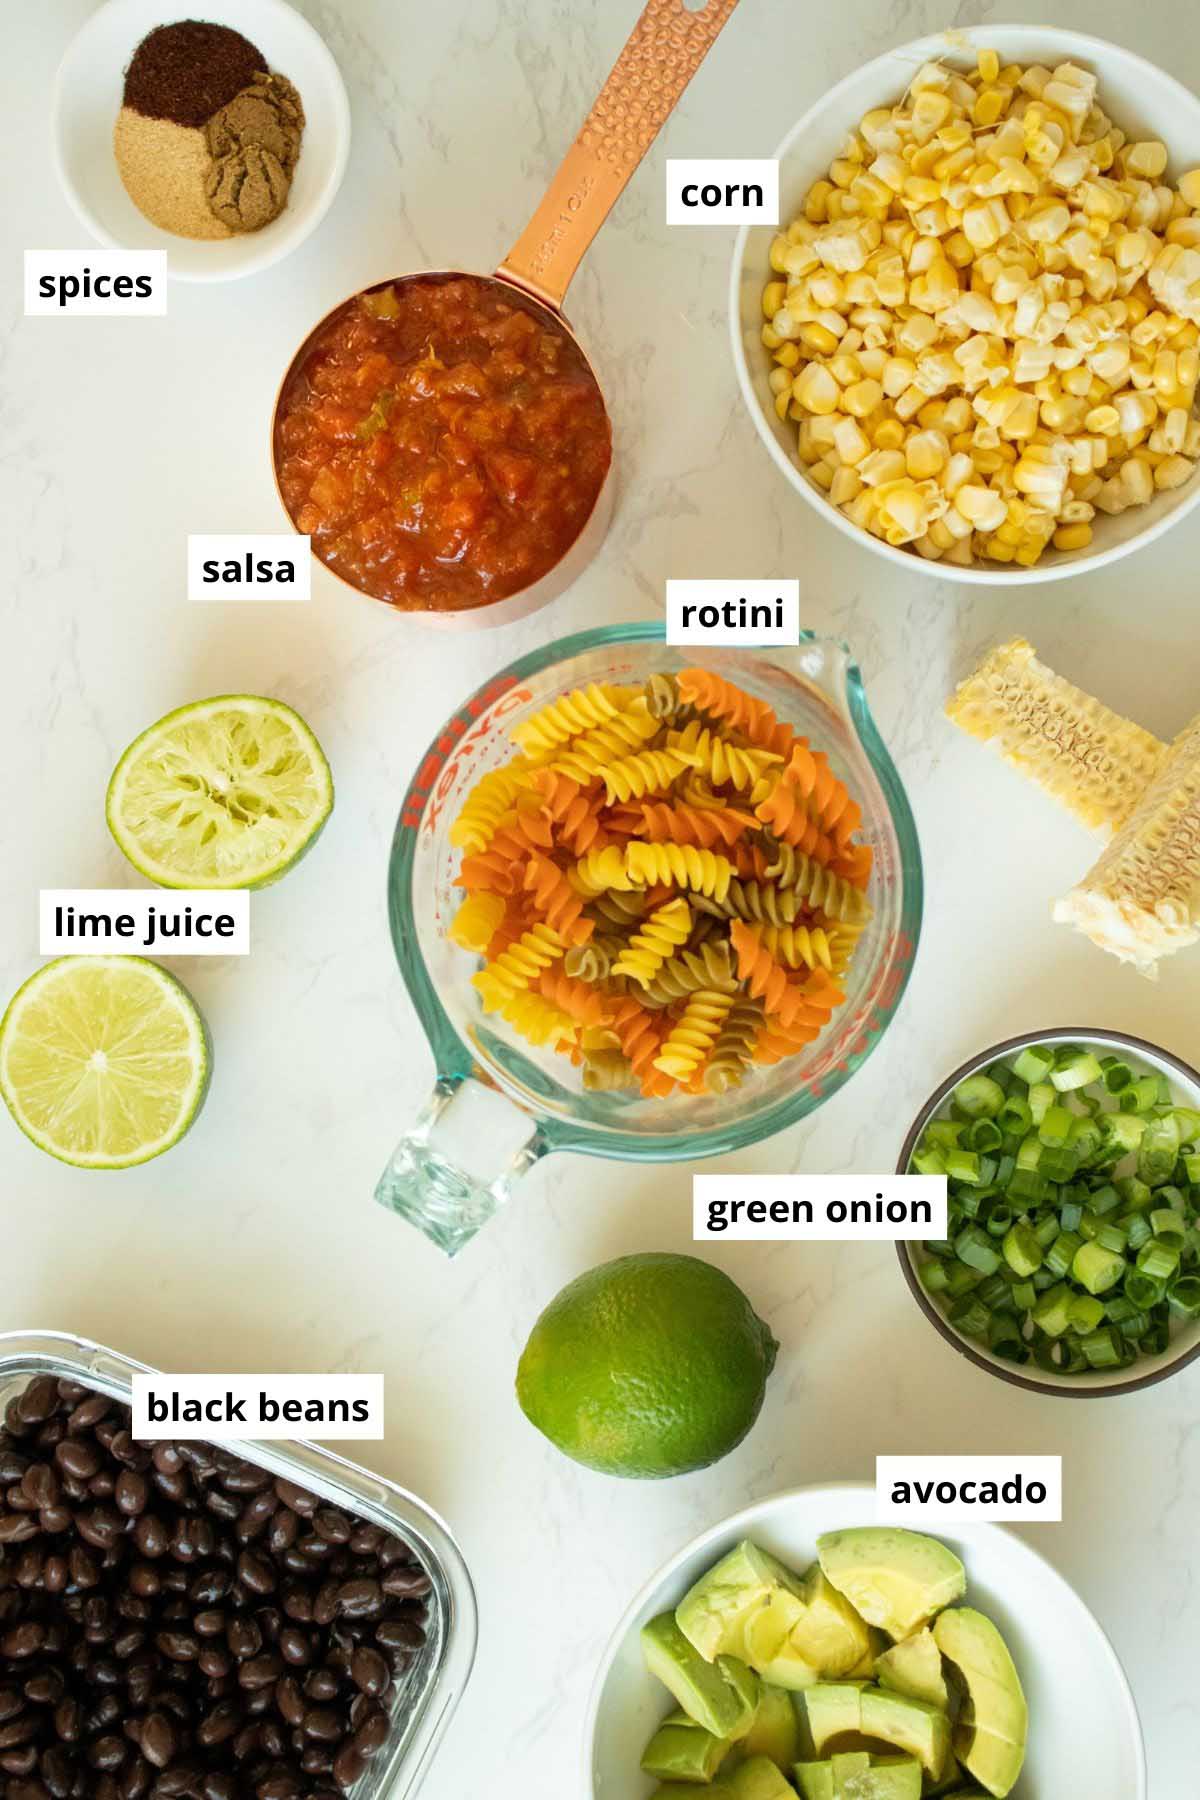 pasta, corn, beans, salsa, avocado, and seasonings on a white table